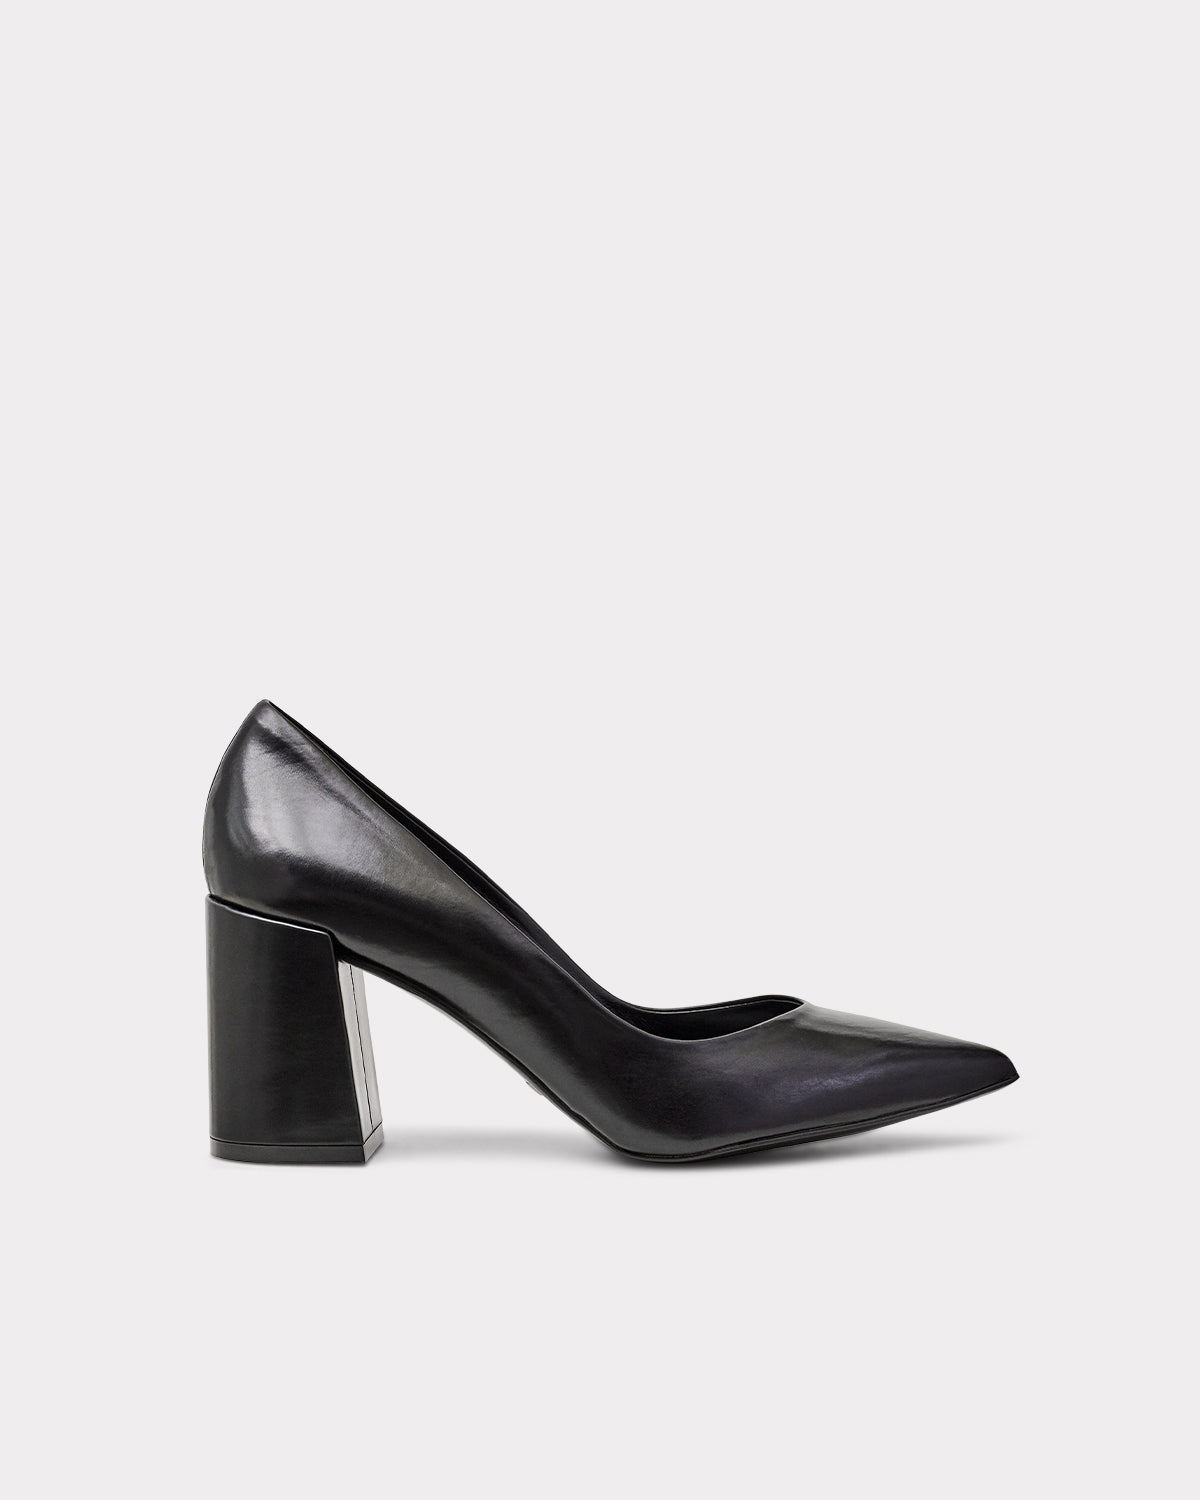 black leather pump with pointed toe and block heel